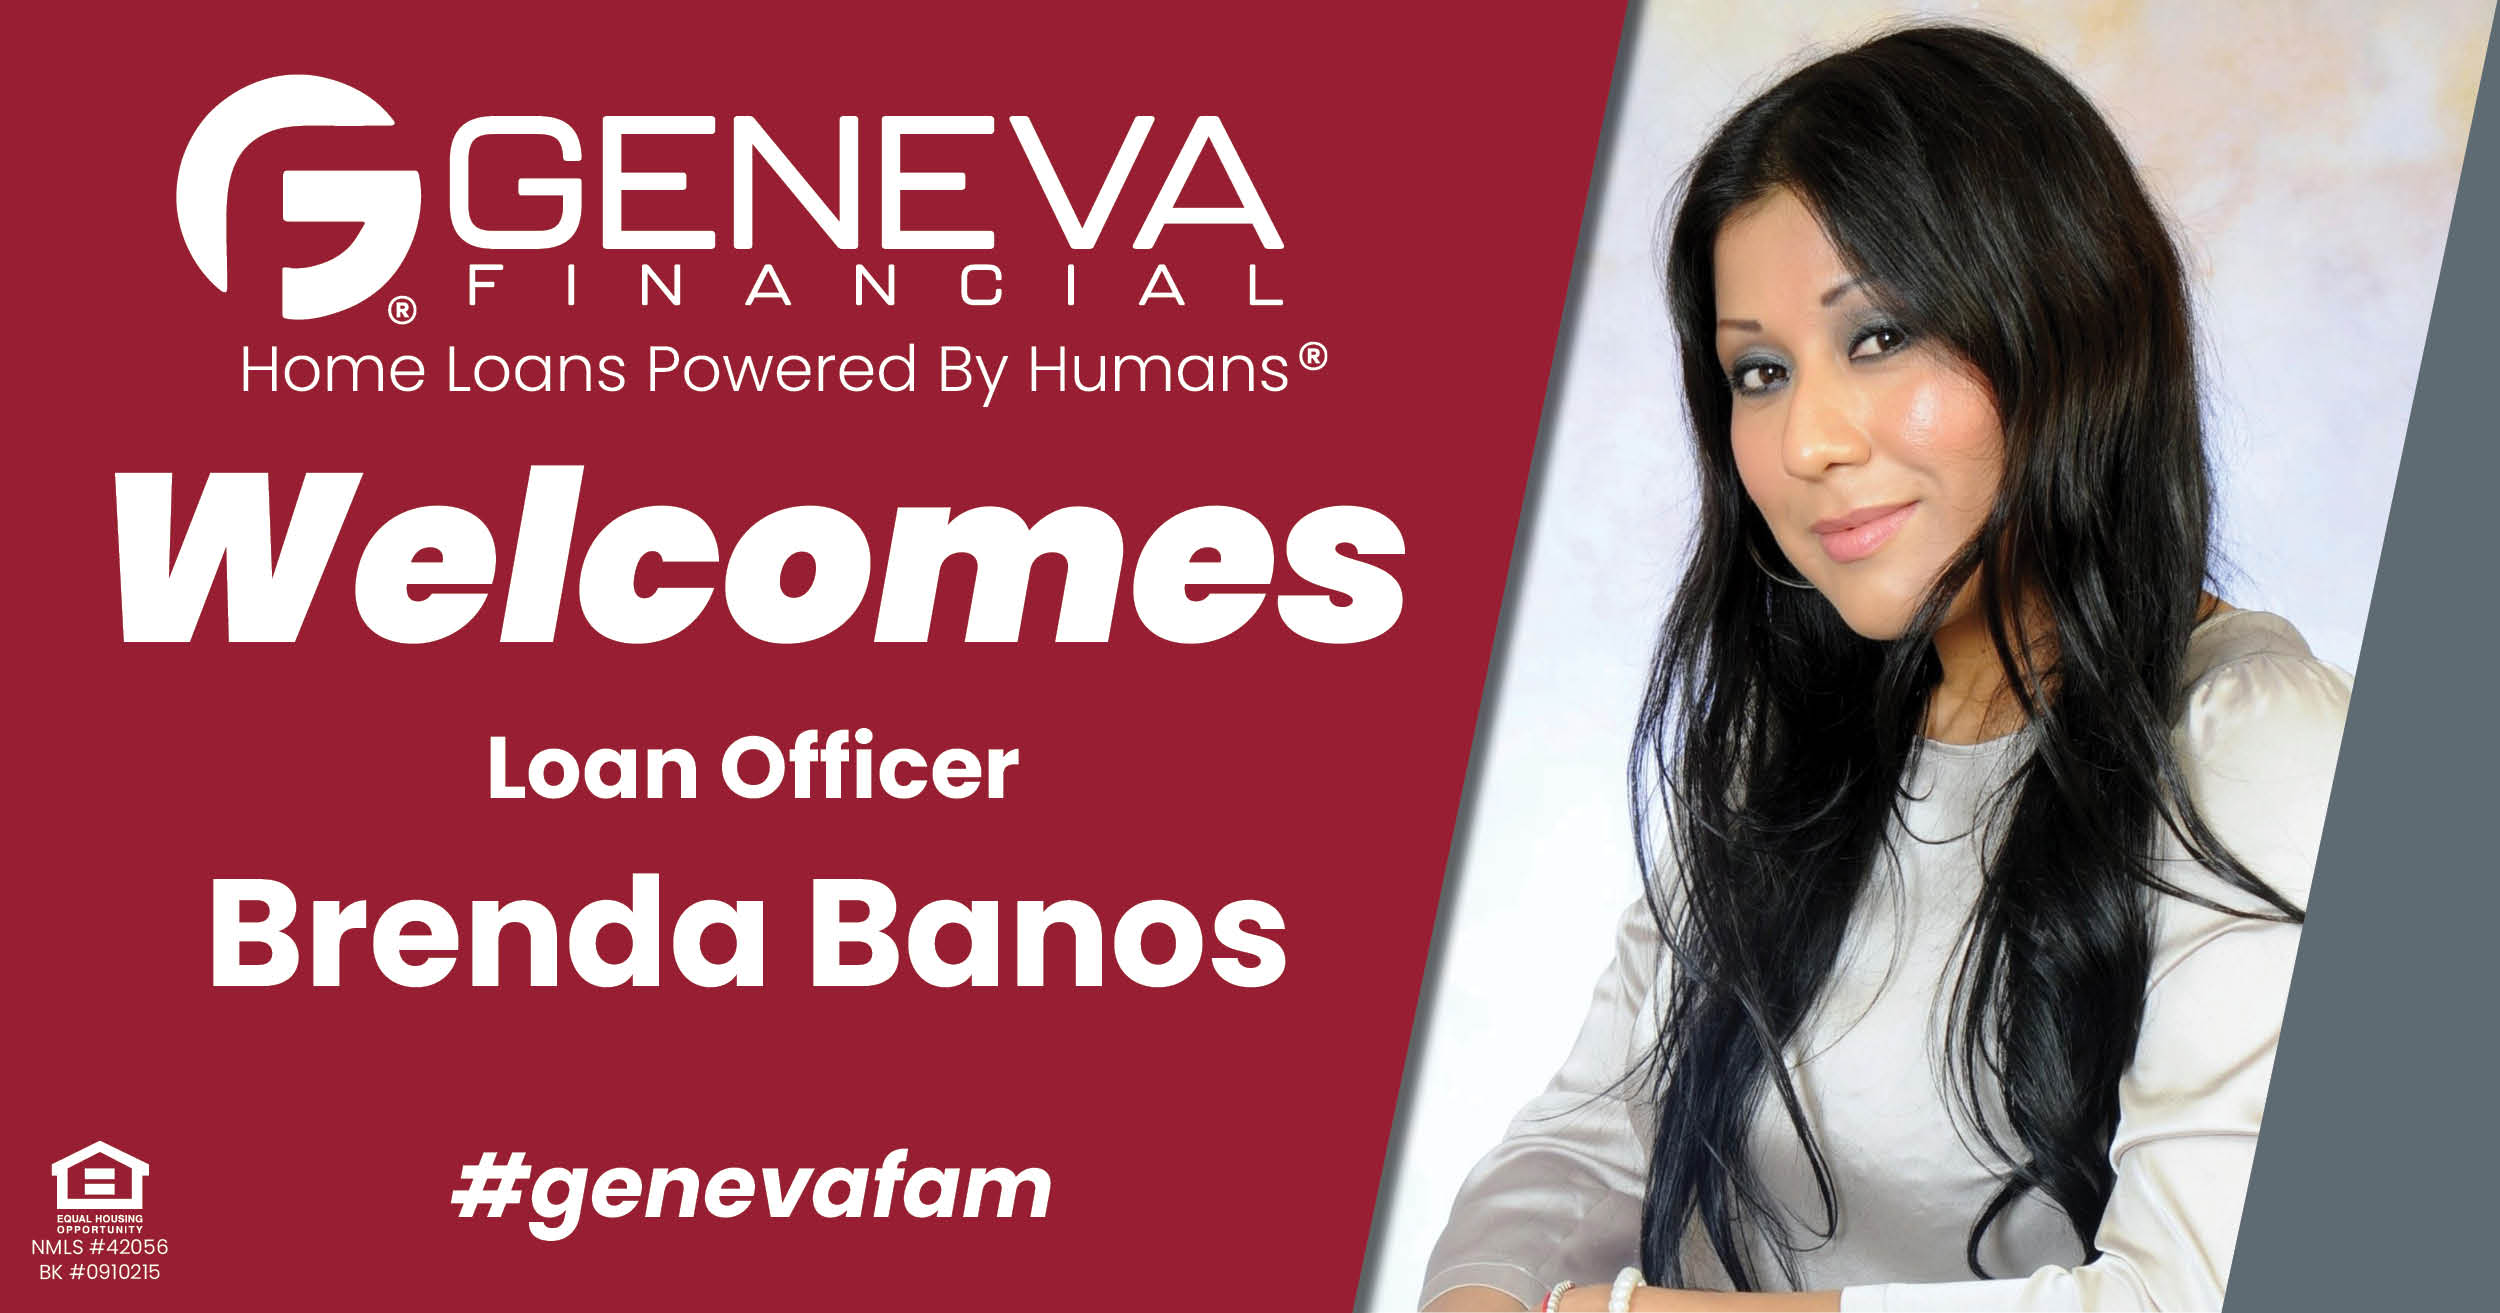 Geneva Financial Welcomes New Loan Officer Brenda Banos to Arizona Market – Home Loans Powered by Humans®.